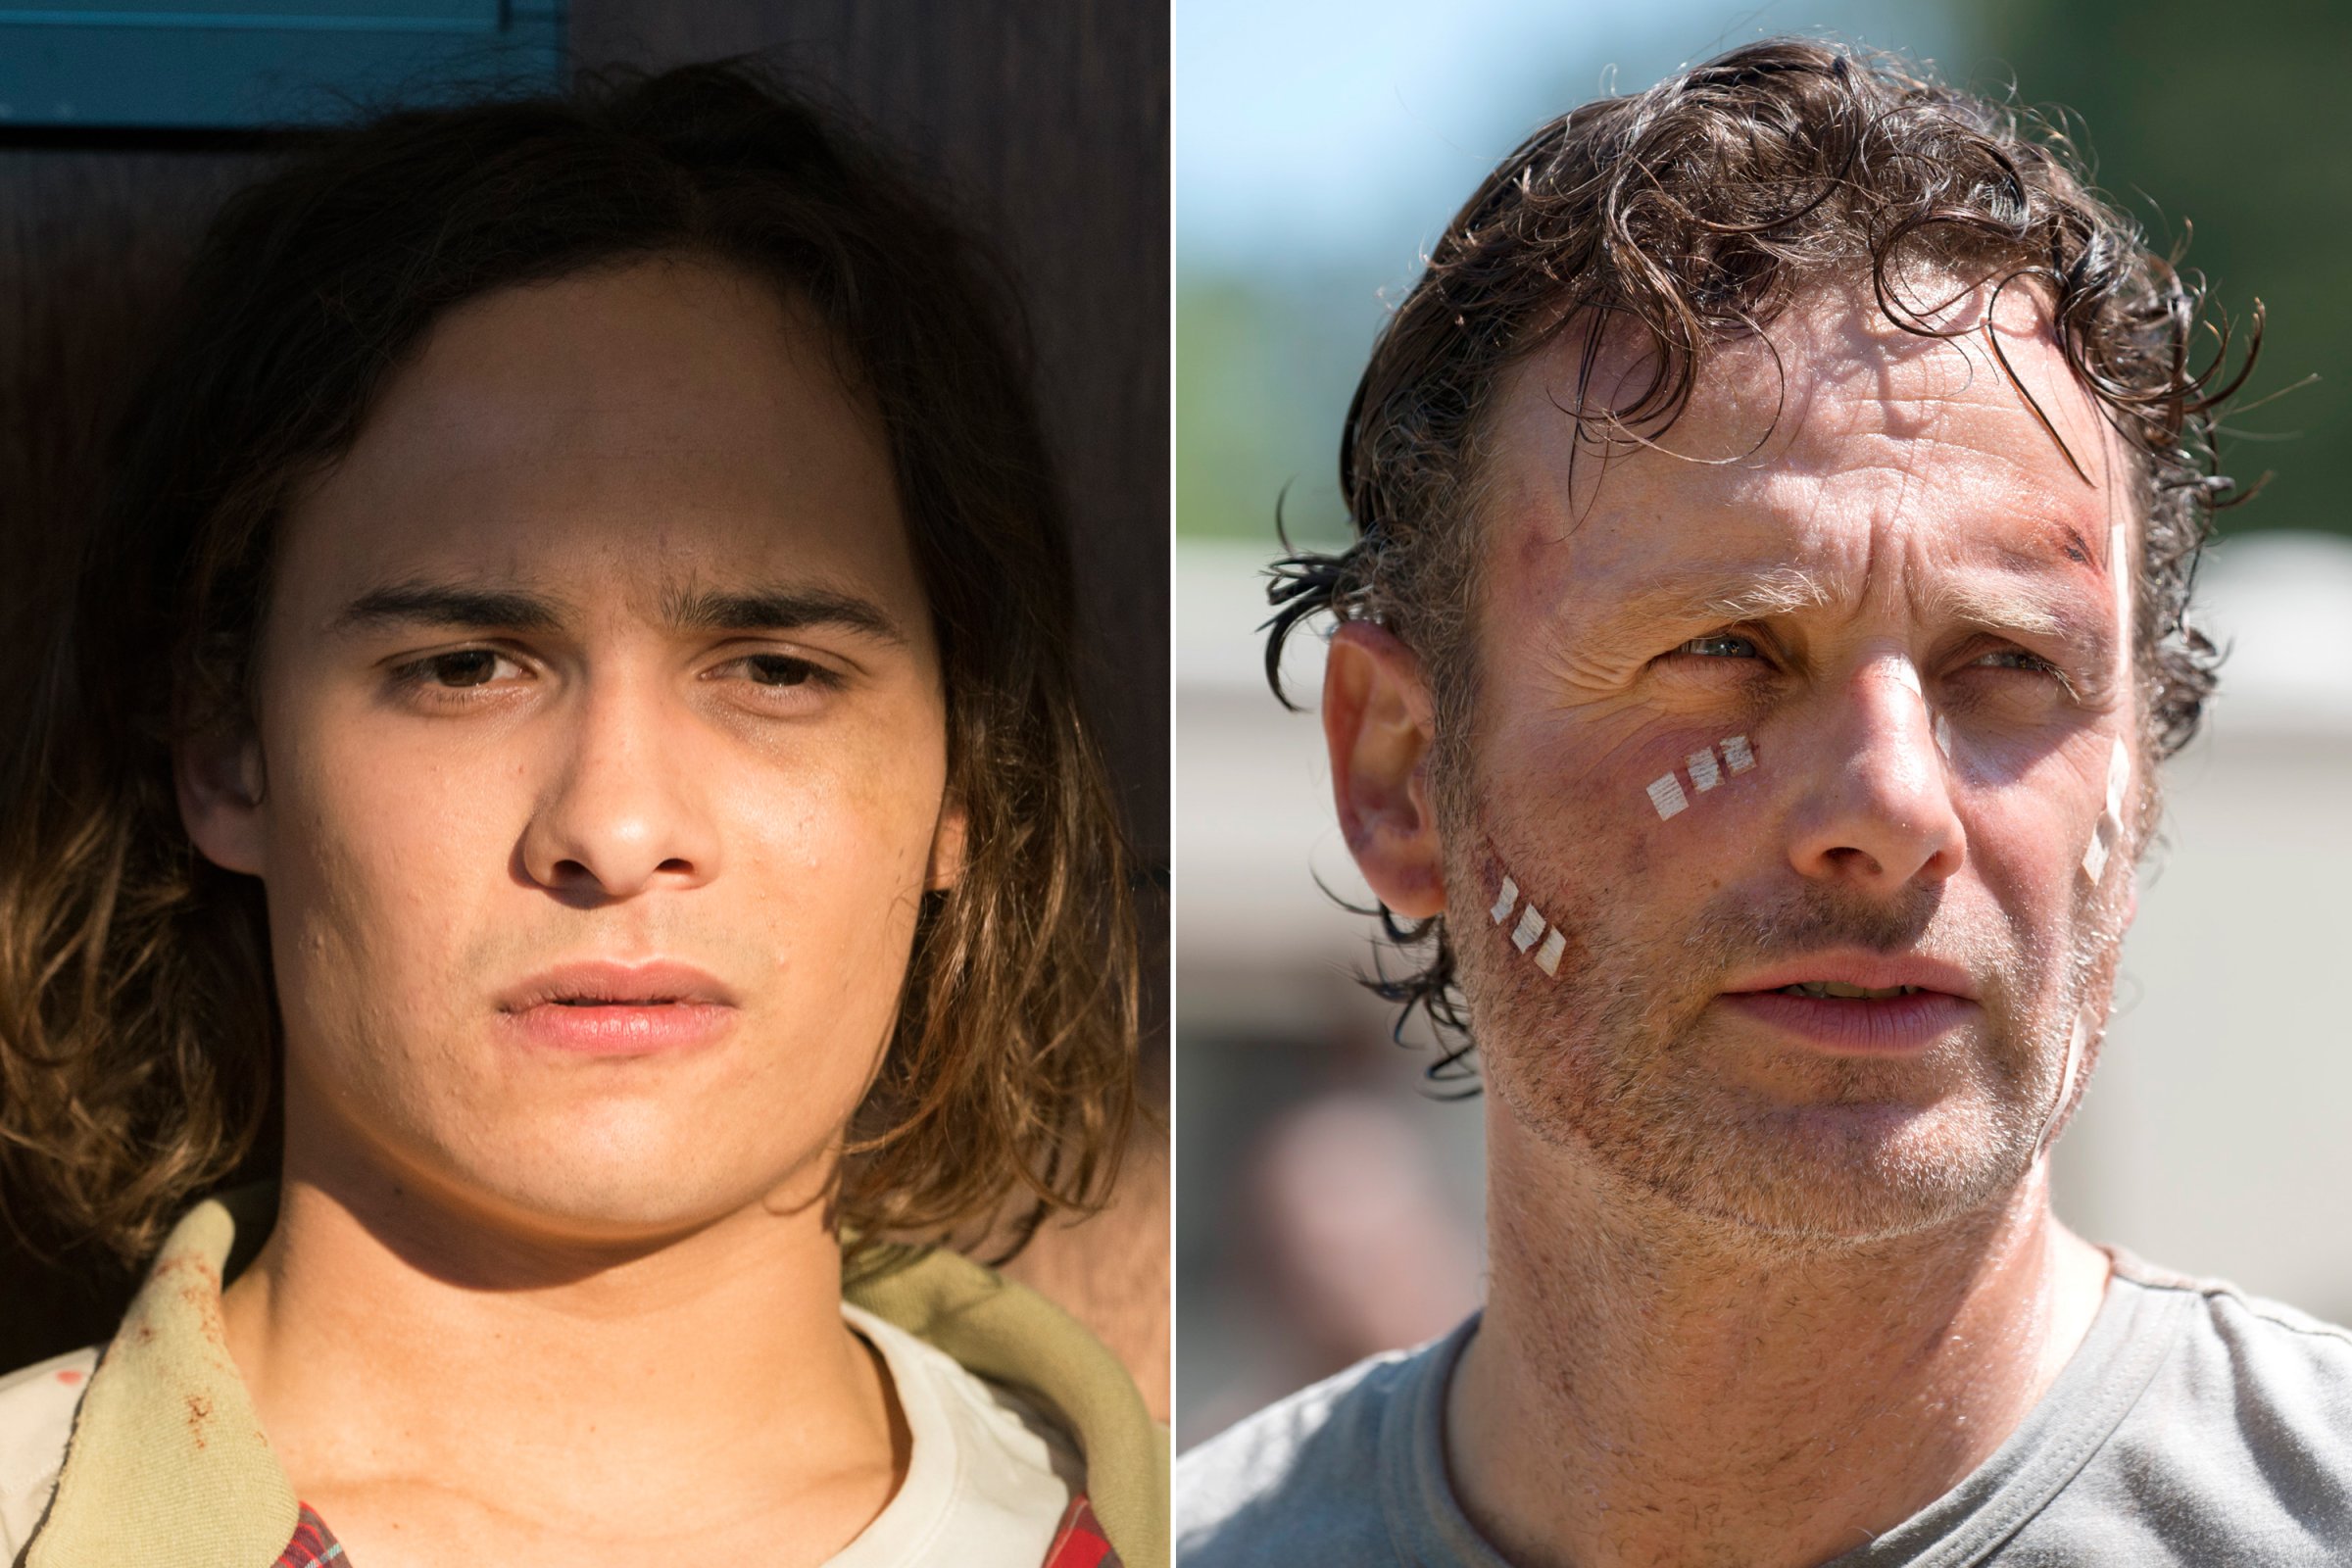 Frank Dillane as Nick Clark in Fear the Walking Dead and Andrew Lincoln as Rick Grimes in The Walking Dead.